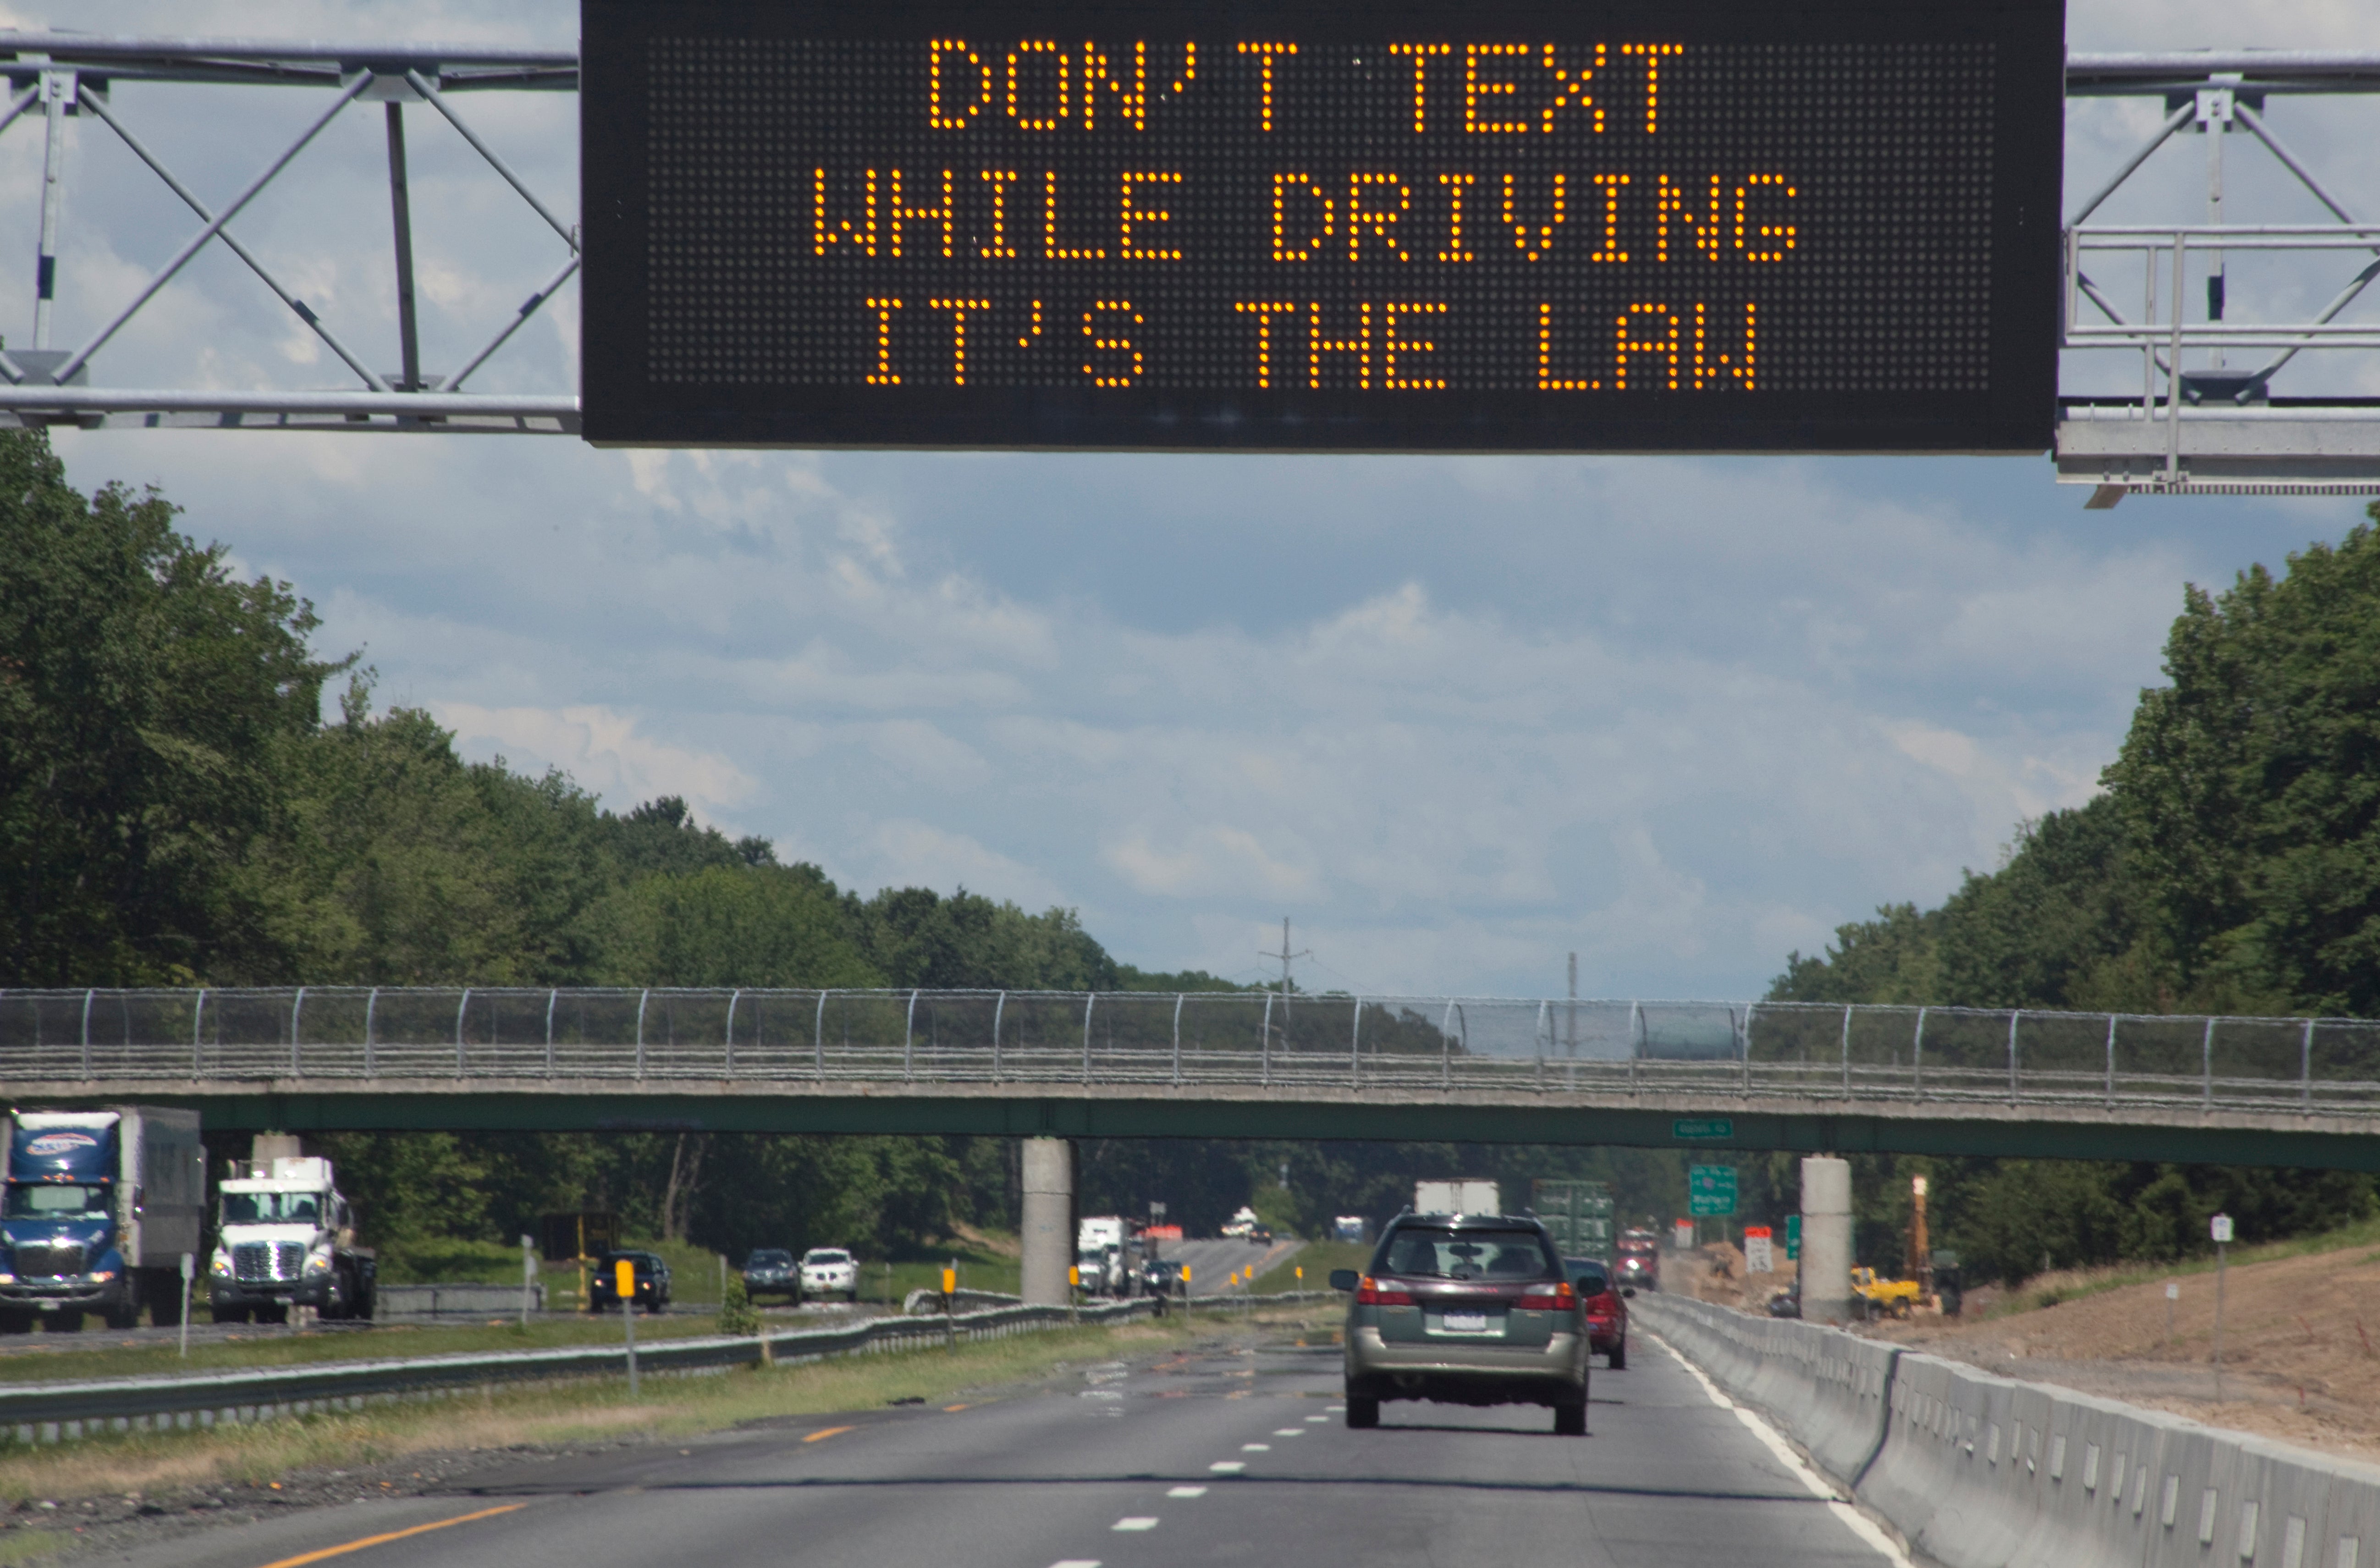 A digital highway sign reads "Don't text while driving it's the law!"